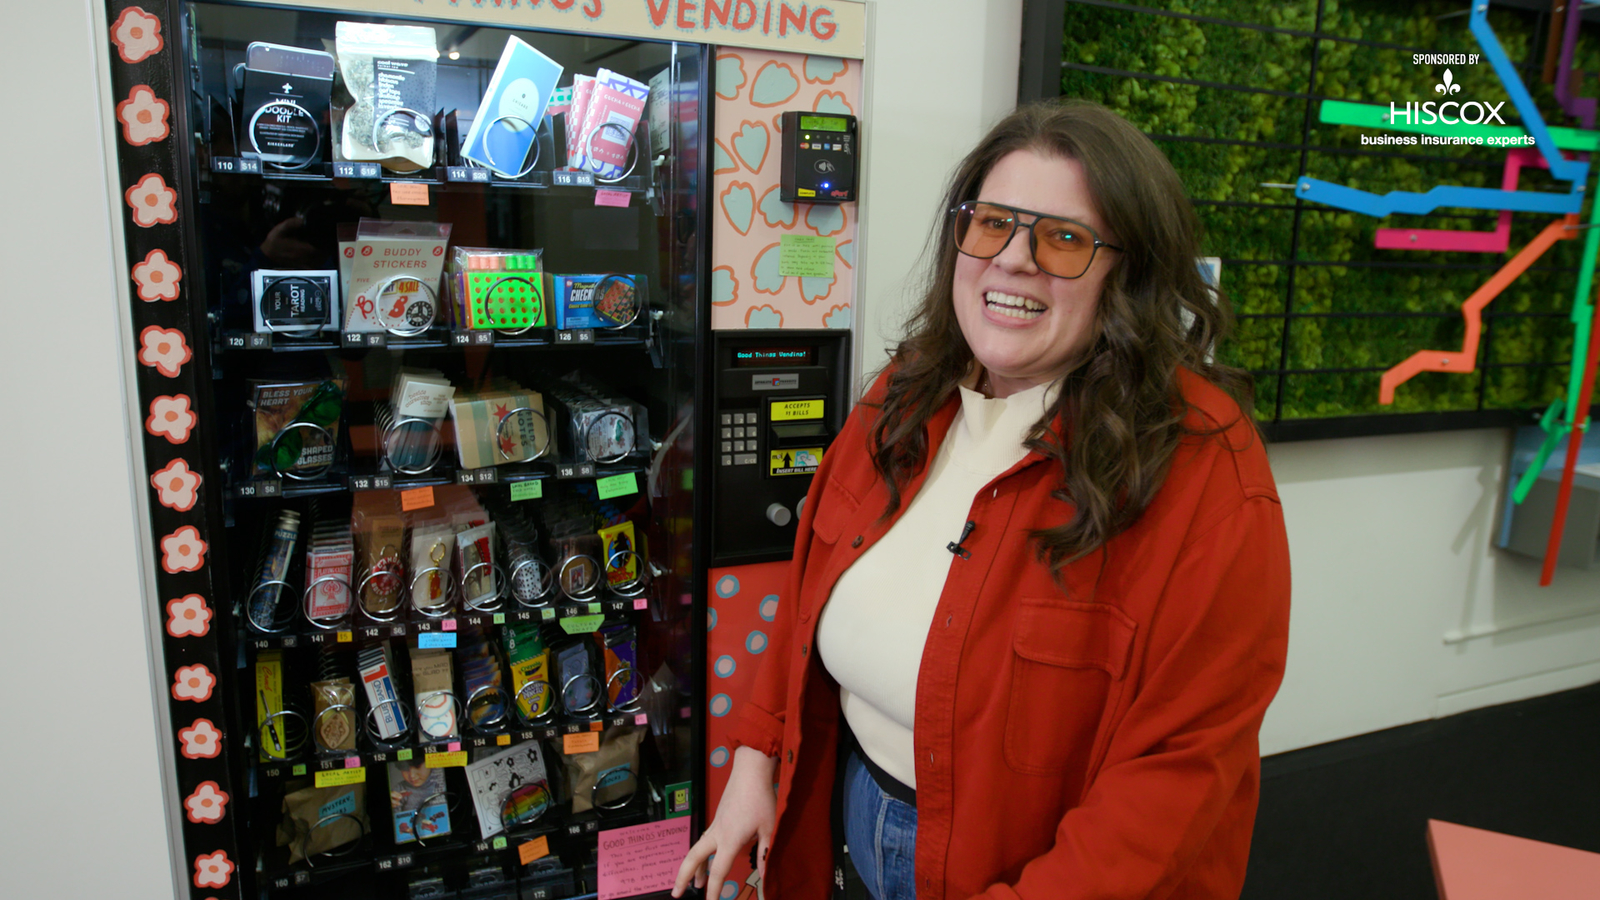 Chicago’s Good Things Vending stocks colorfully painted machines with local artisan wares [Video]